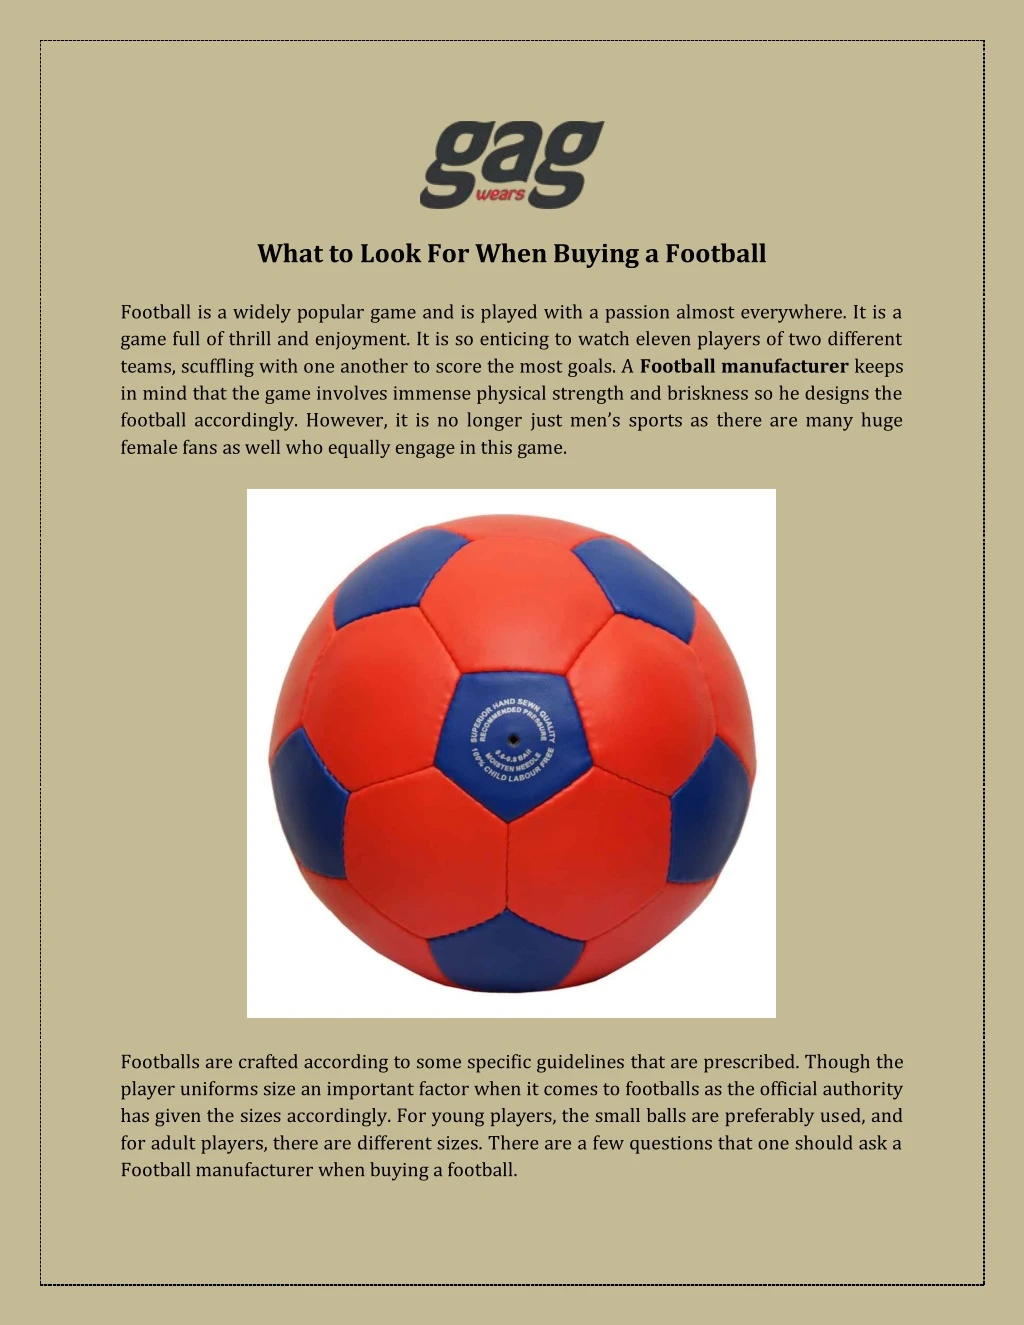 what to look for when buying a football